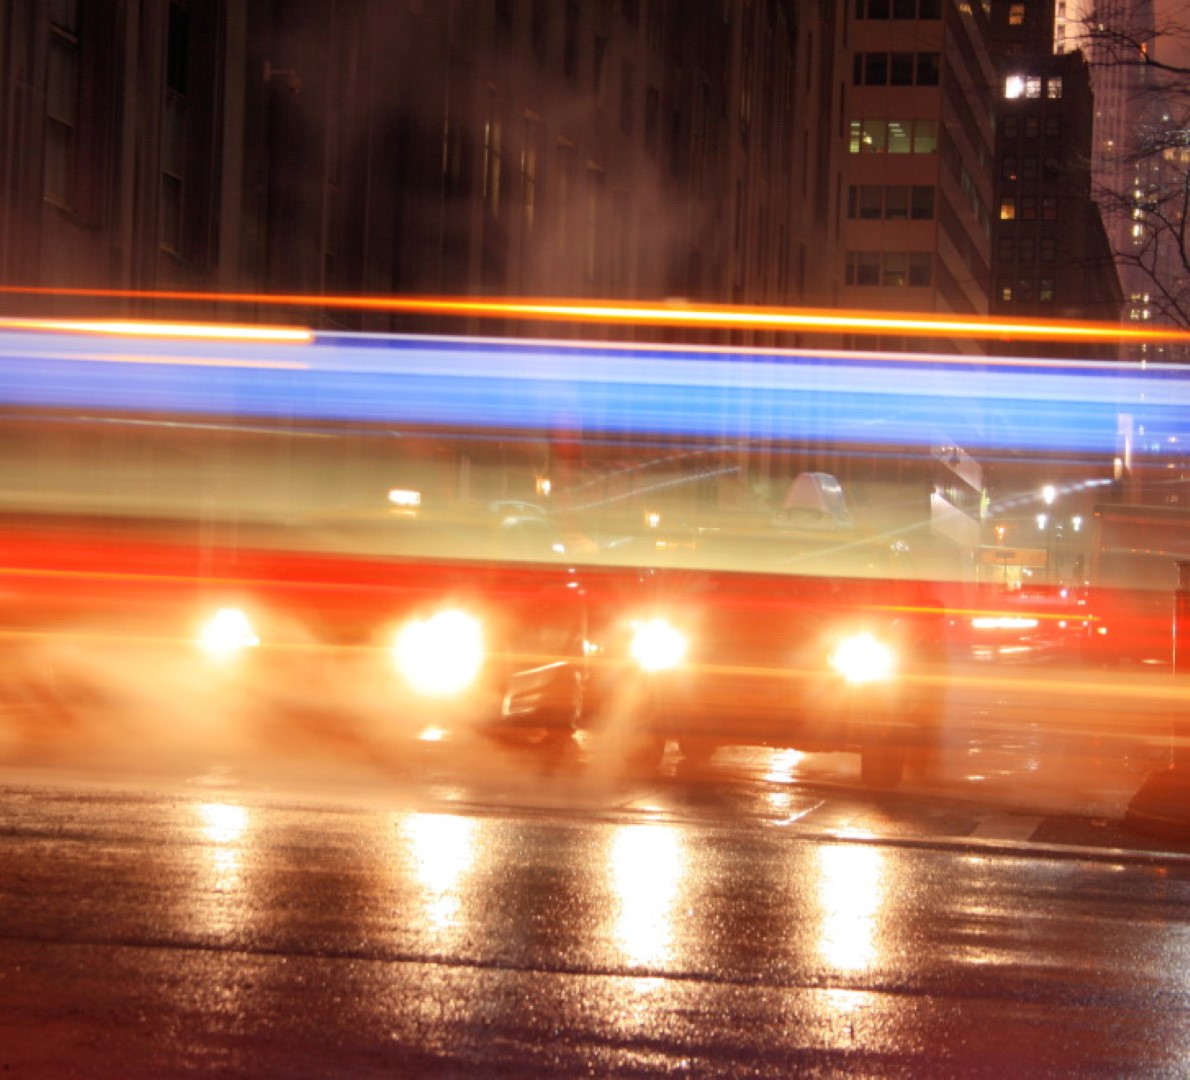 Night Driving - Are you driving faster than your headlights can see?